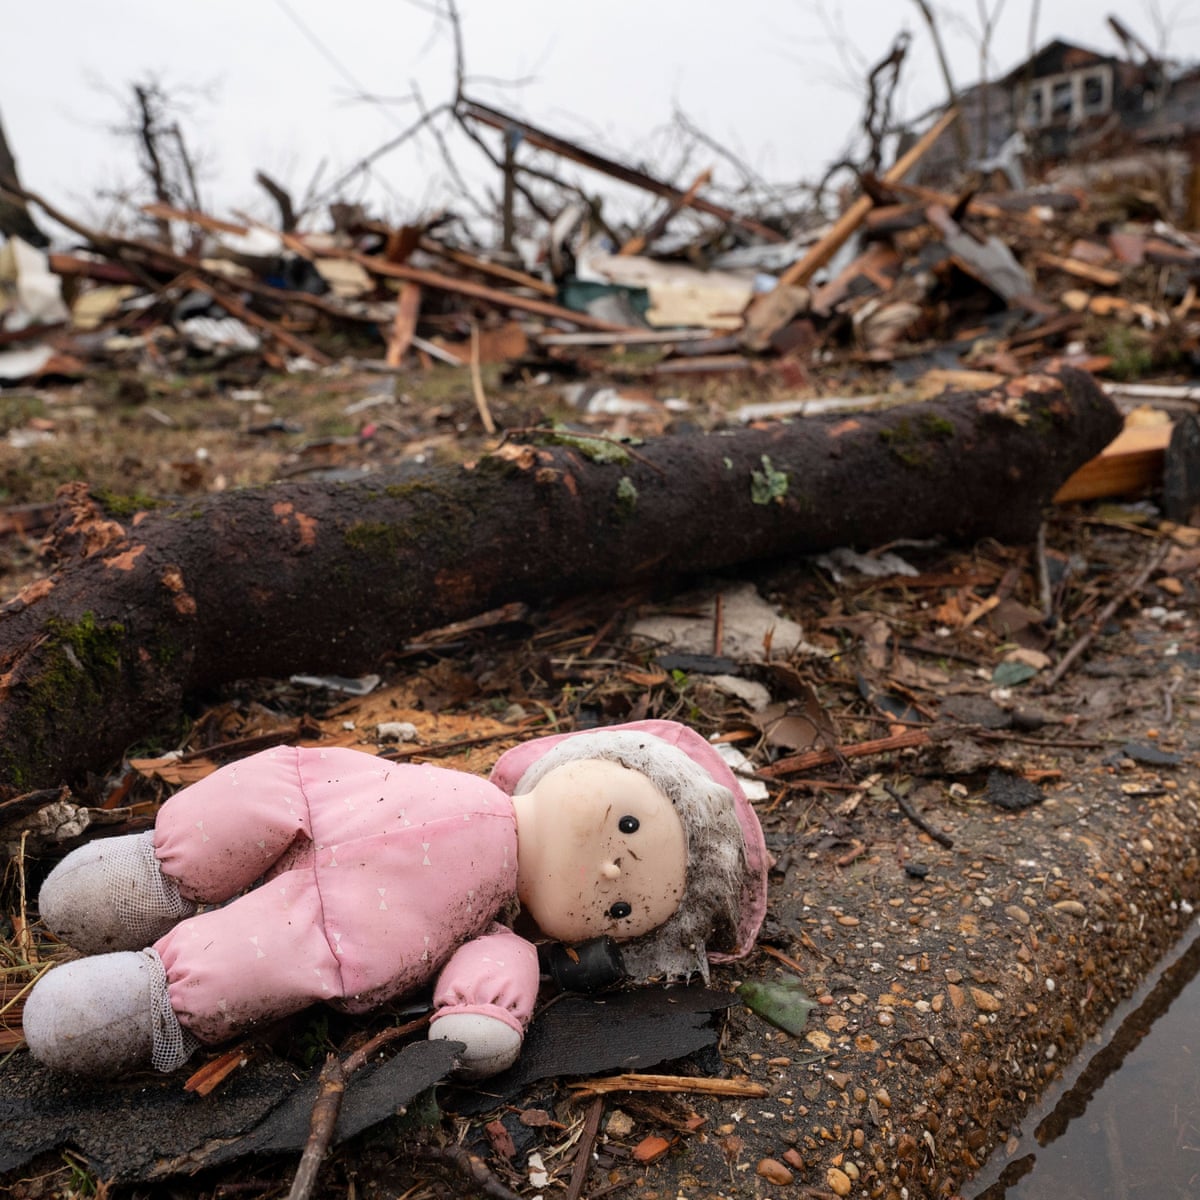 Kentucky tornadoes: babies in bathtub survive after twister blows them  outside | Tornadoes | The Guardian